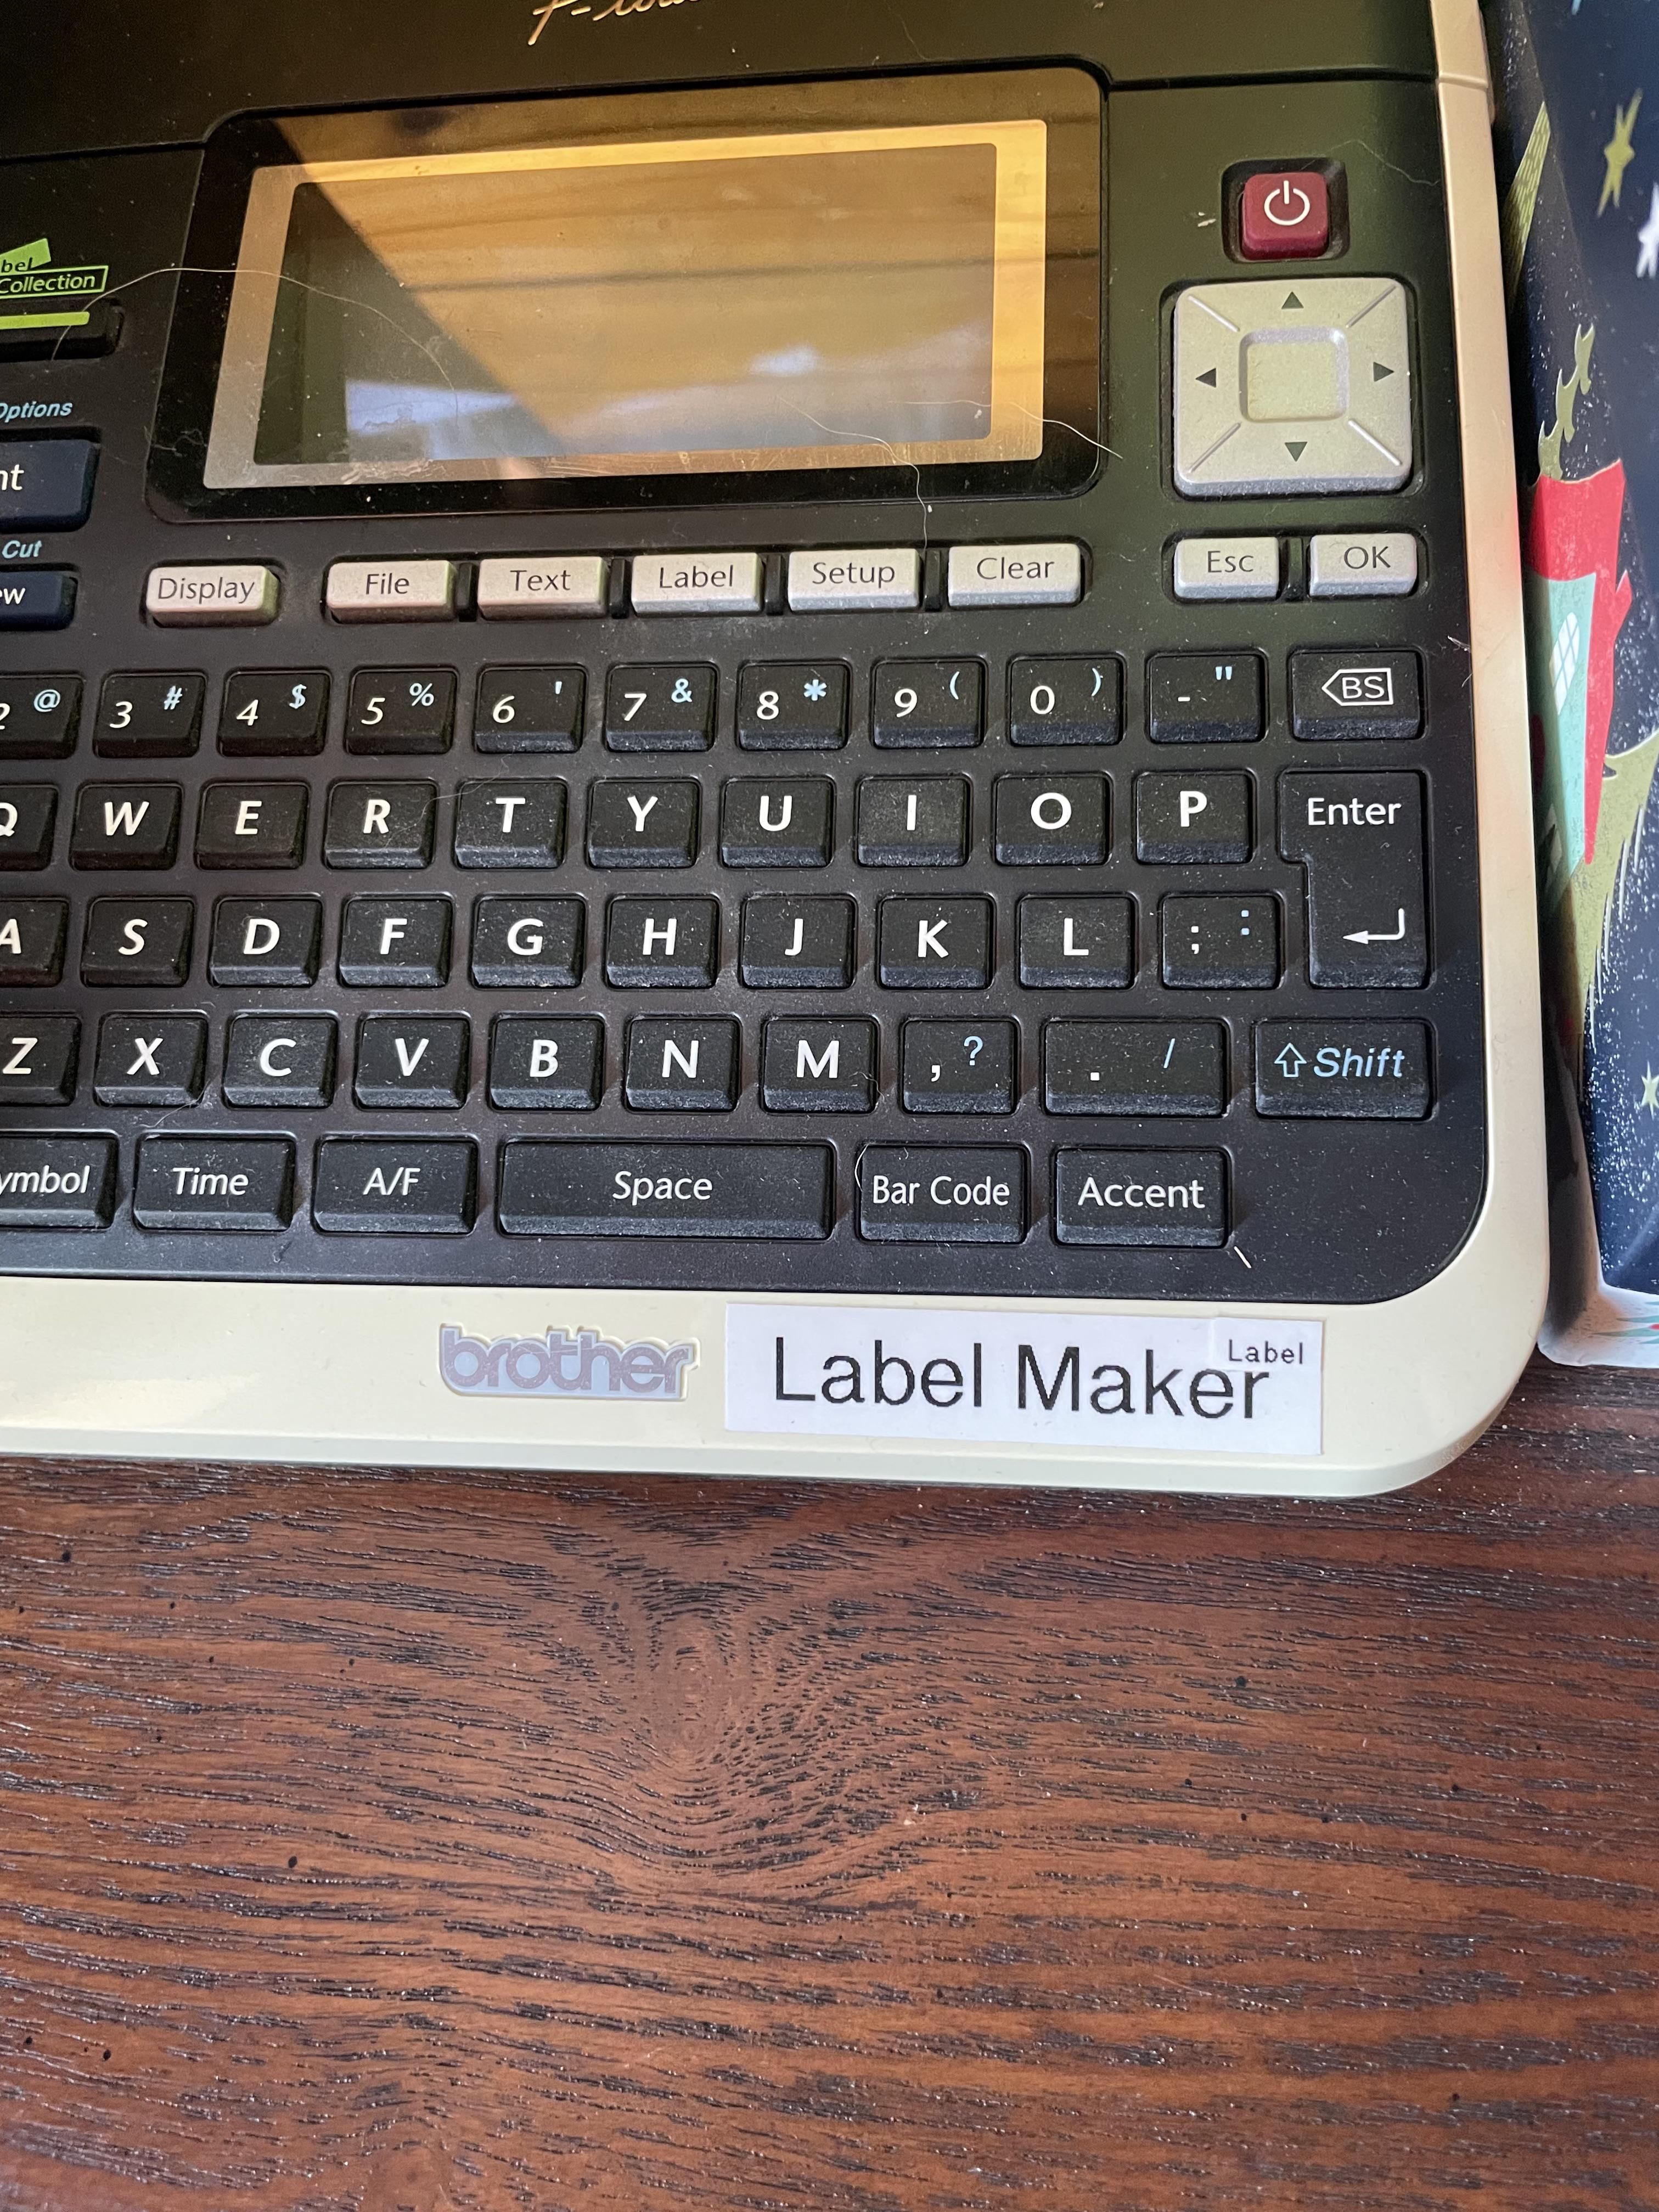 found this on my dads label maker